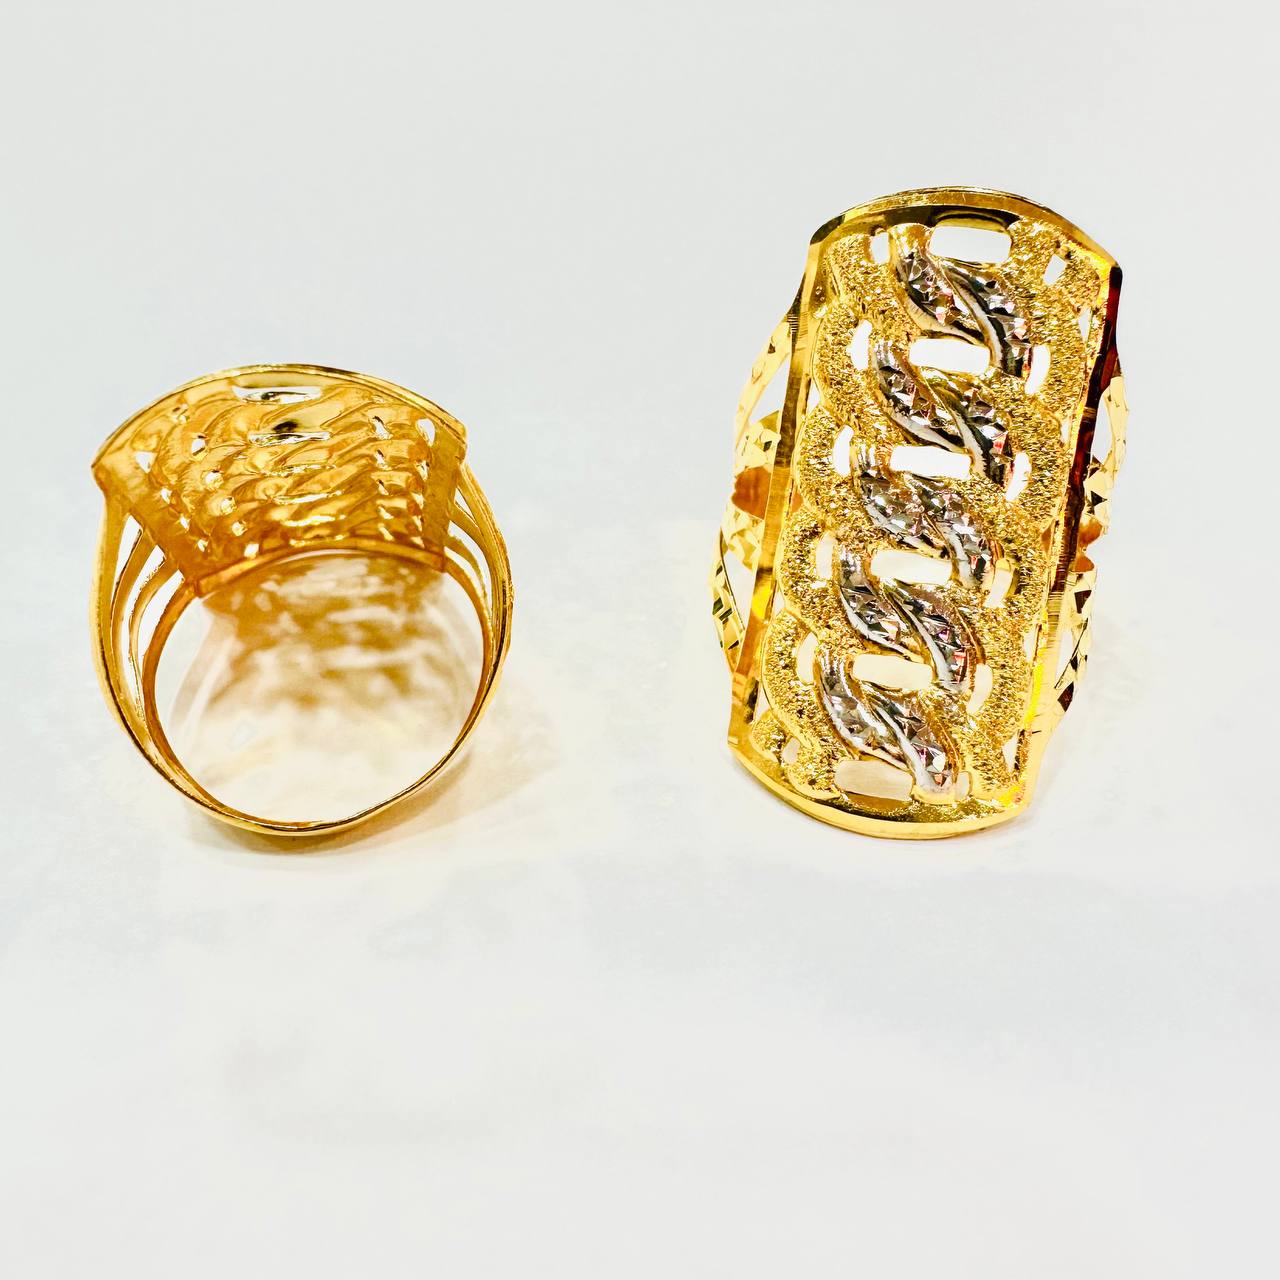 22k / 916 Gold Wide Coco Ring 2 Tone-916 gold-Best Gold Shop